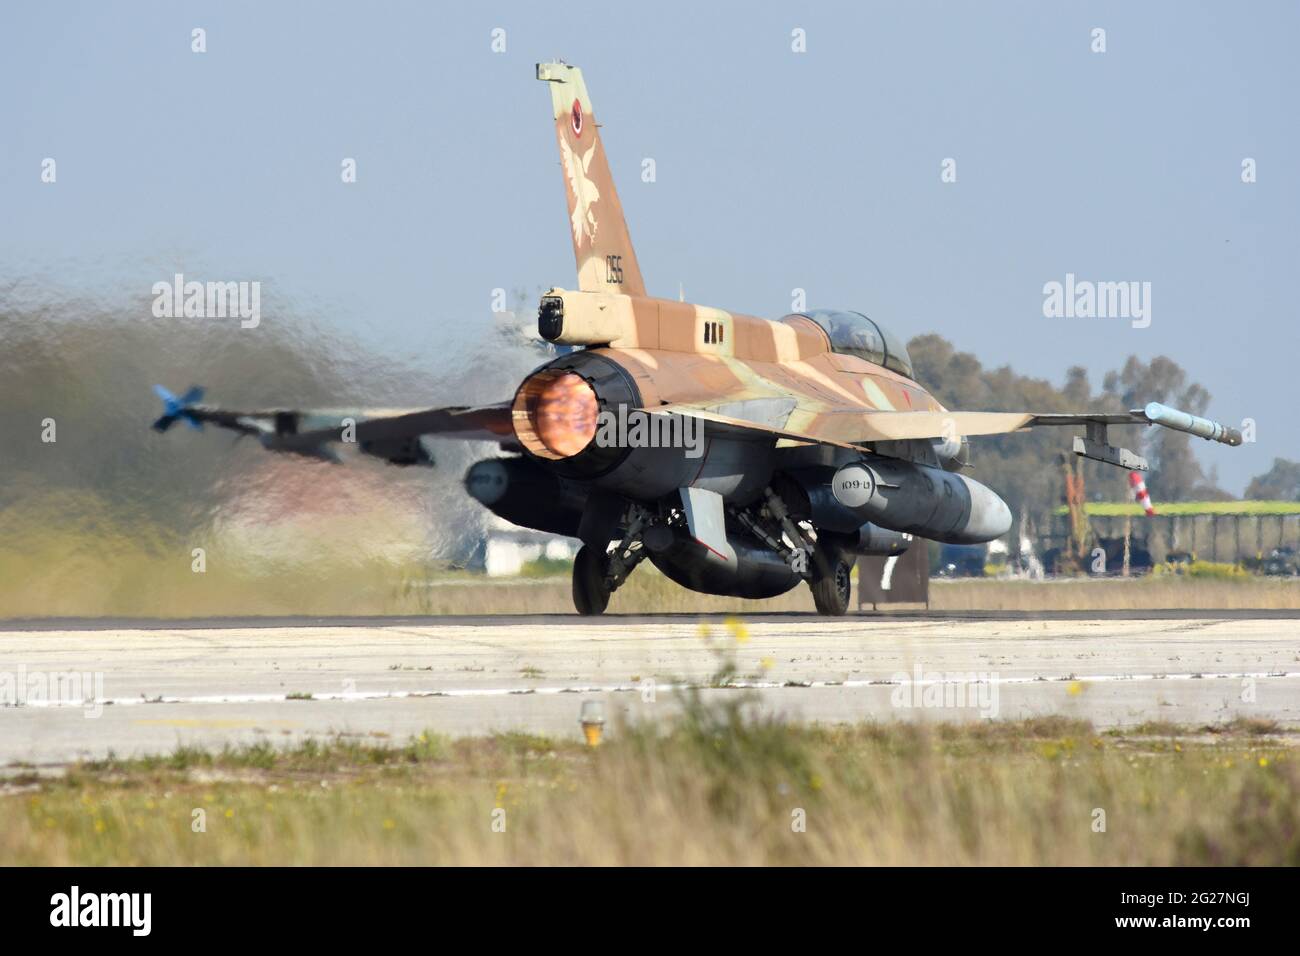 Israel Air Force F-16D taking off. Stock Photo